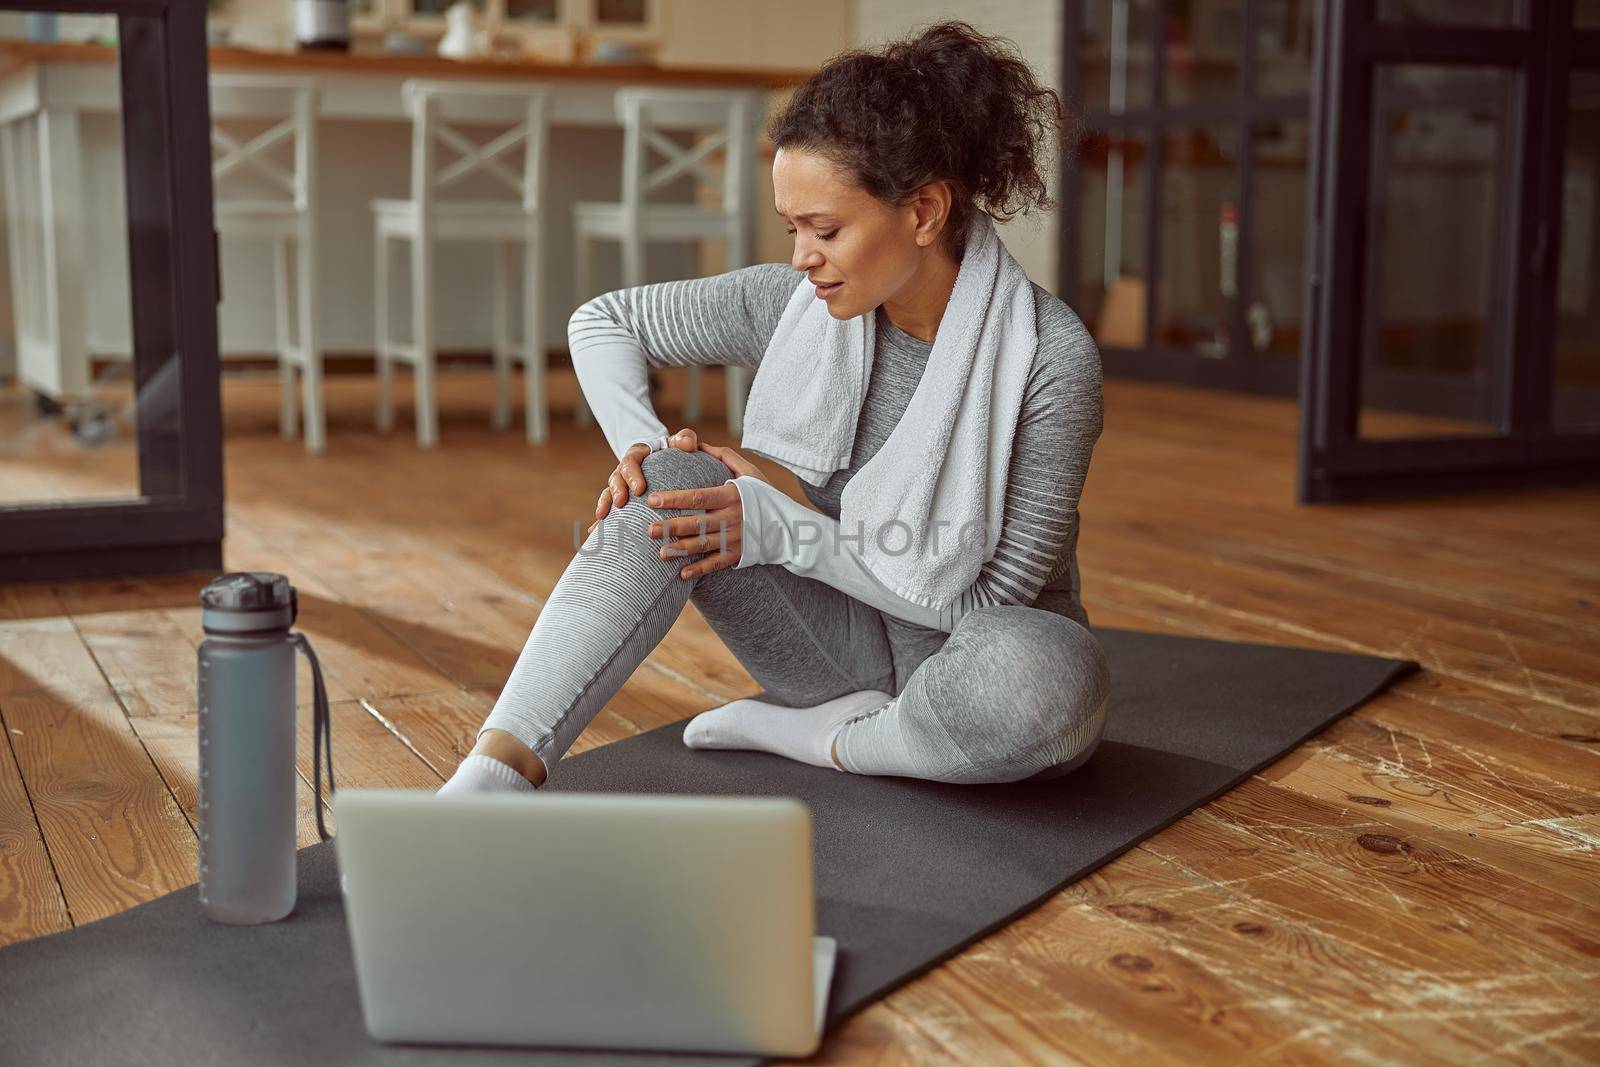 Female is sitting on mat and touching joint while suffering pain during video workout on laptop at home